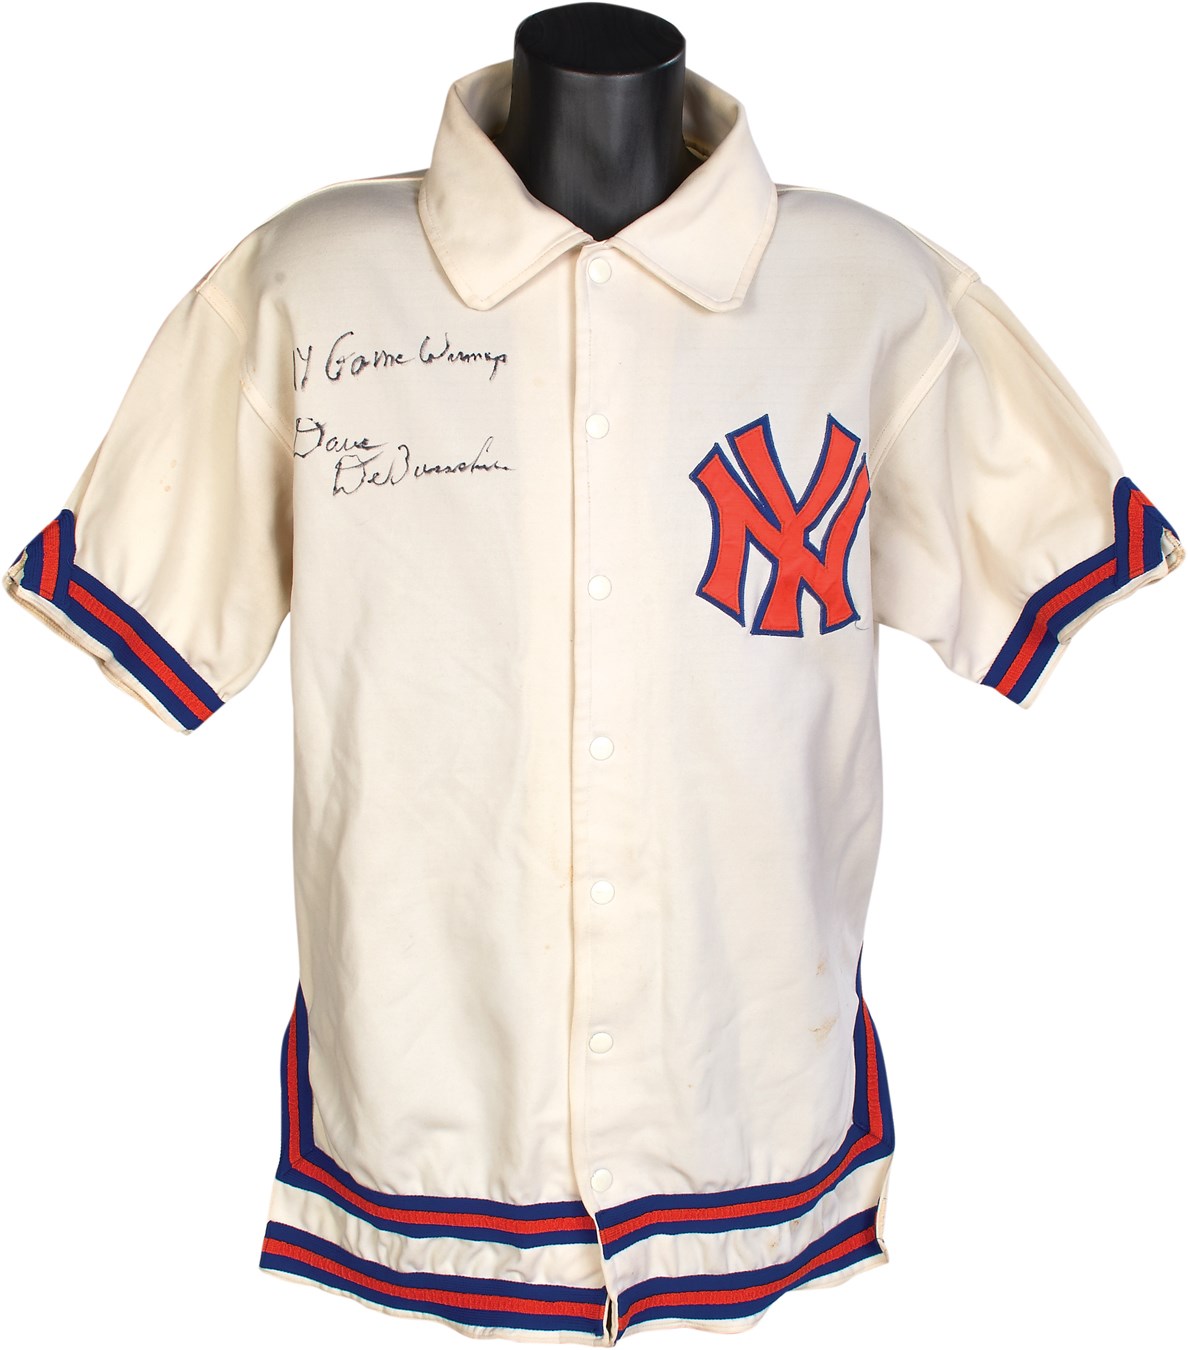 Early 1970s Dave DeBusschere New York Knicks Warm Up Top - Photomatched to Last Regular Season Game